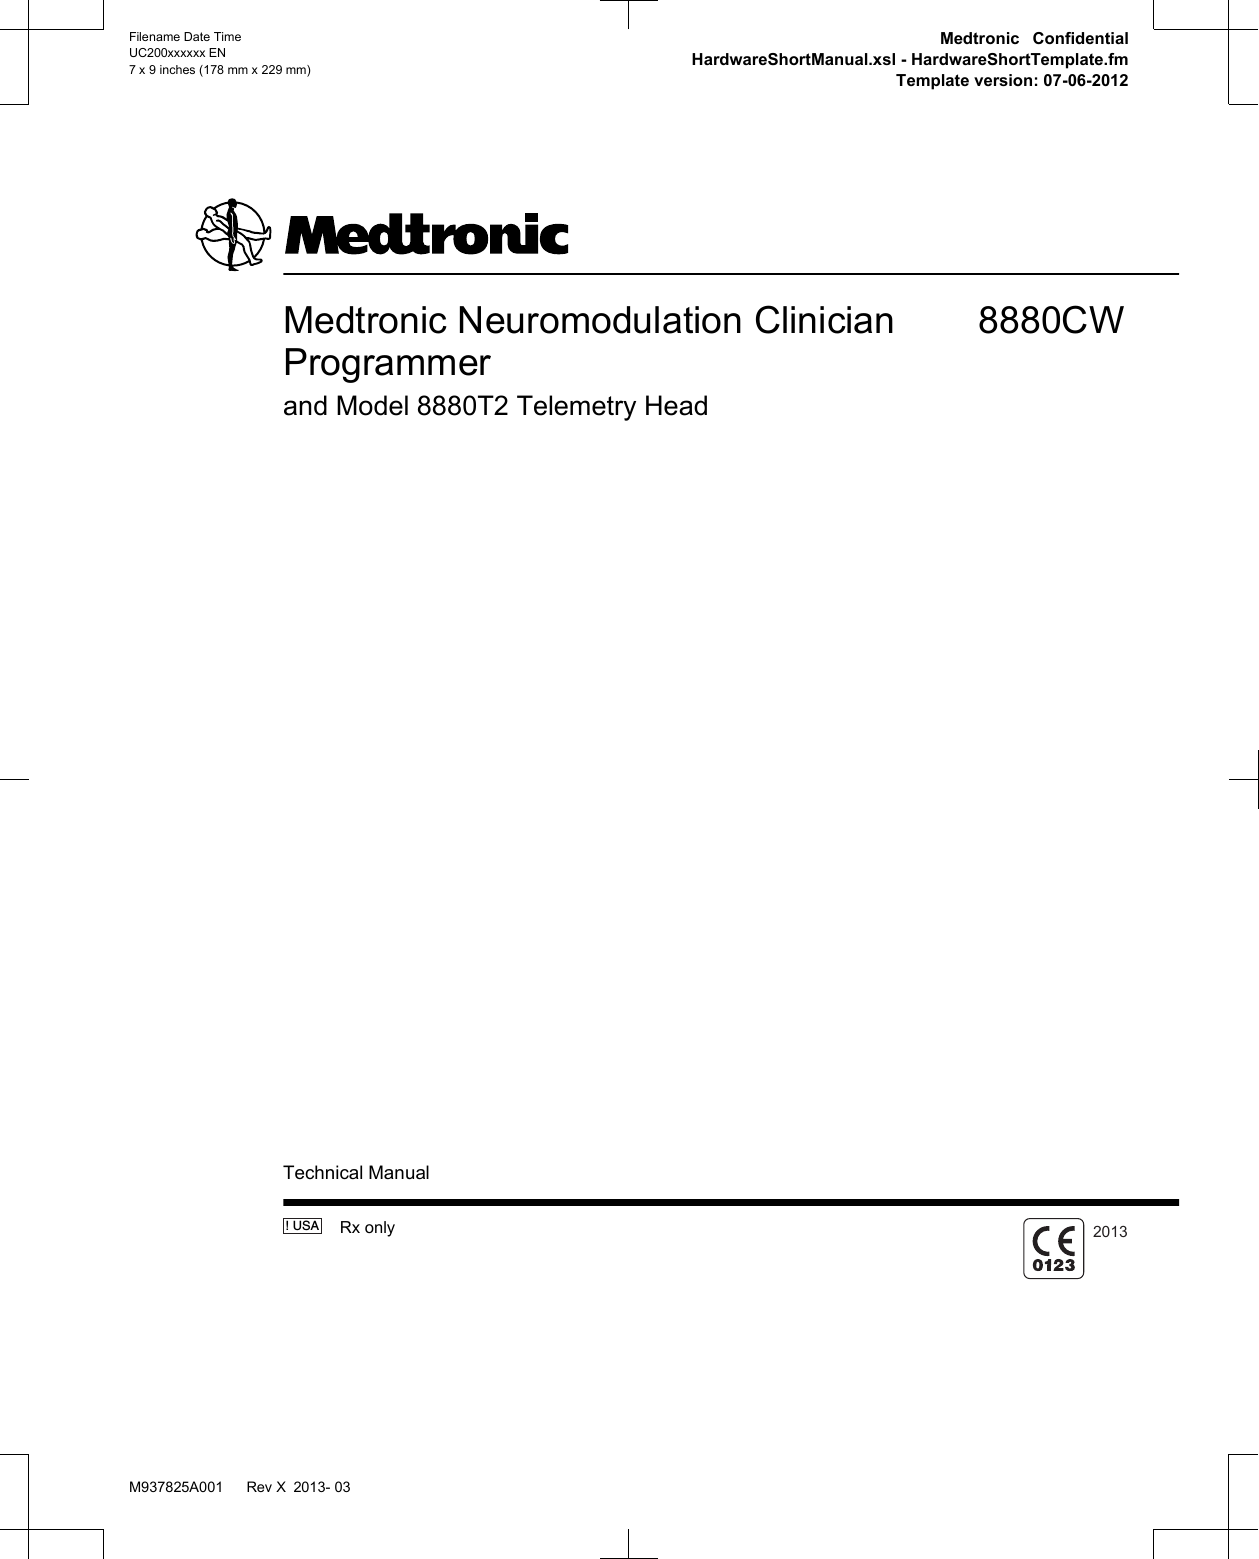 Medtronic Neuromodulation ClinicianProgrammer8880CWand Model 8880T2 Telemetry HeadTechnical Manual! USA   Rx only 2013Filename Date TimeUC200xxxxxx EN7 x 9 inches (178 mm x 229 mm)Medtronic ConfidentialHardwareShortManual.xsl - HardwareShortTemplate.fmTemplate version: 07-06-2012M937825A001   Rev X 2013- 03